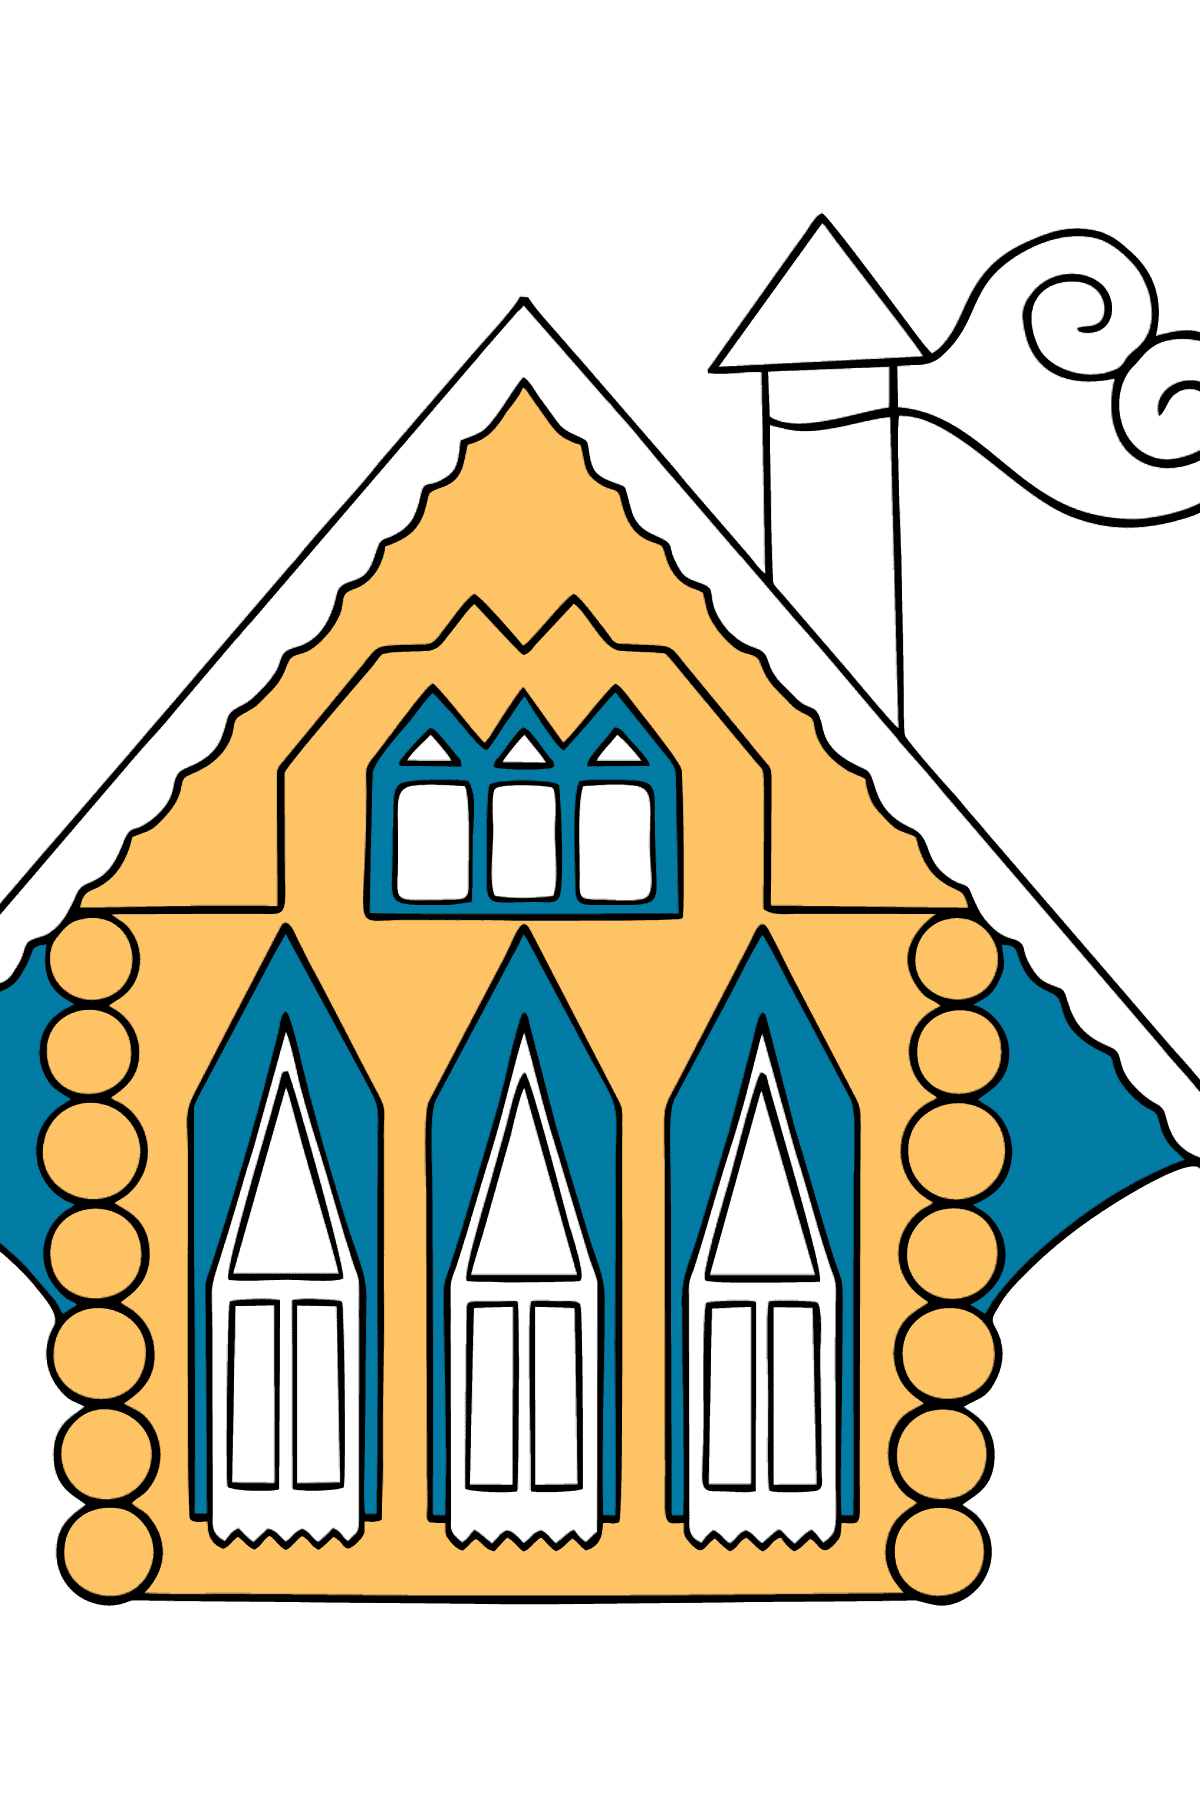 Simple Coloring Page - A Rainbow House - Coloring Pages for Kids